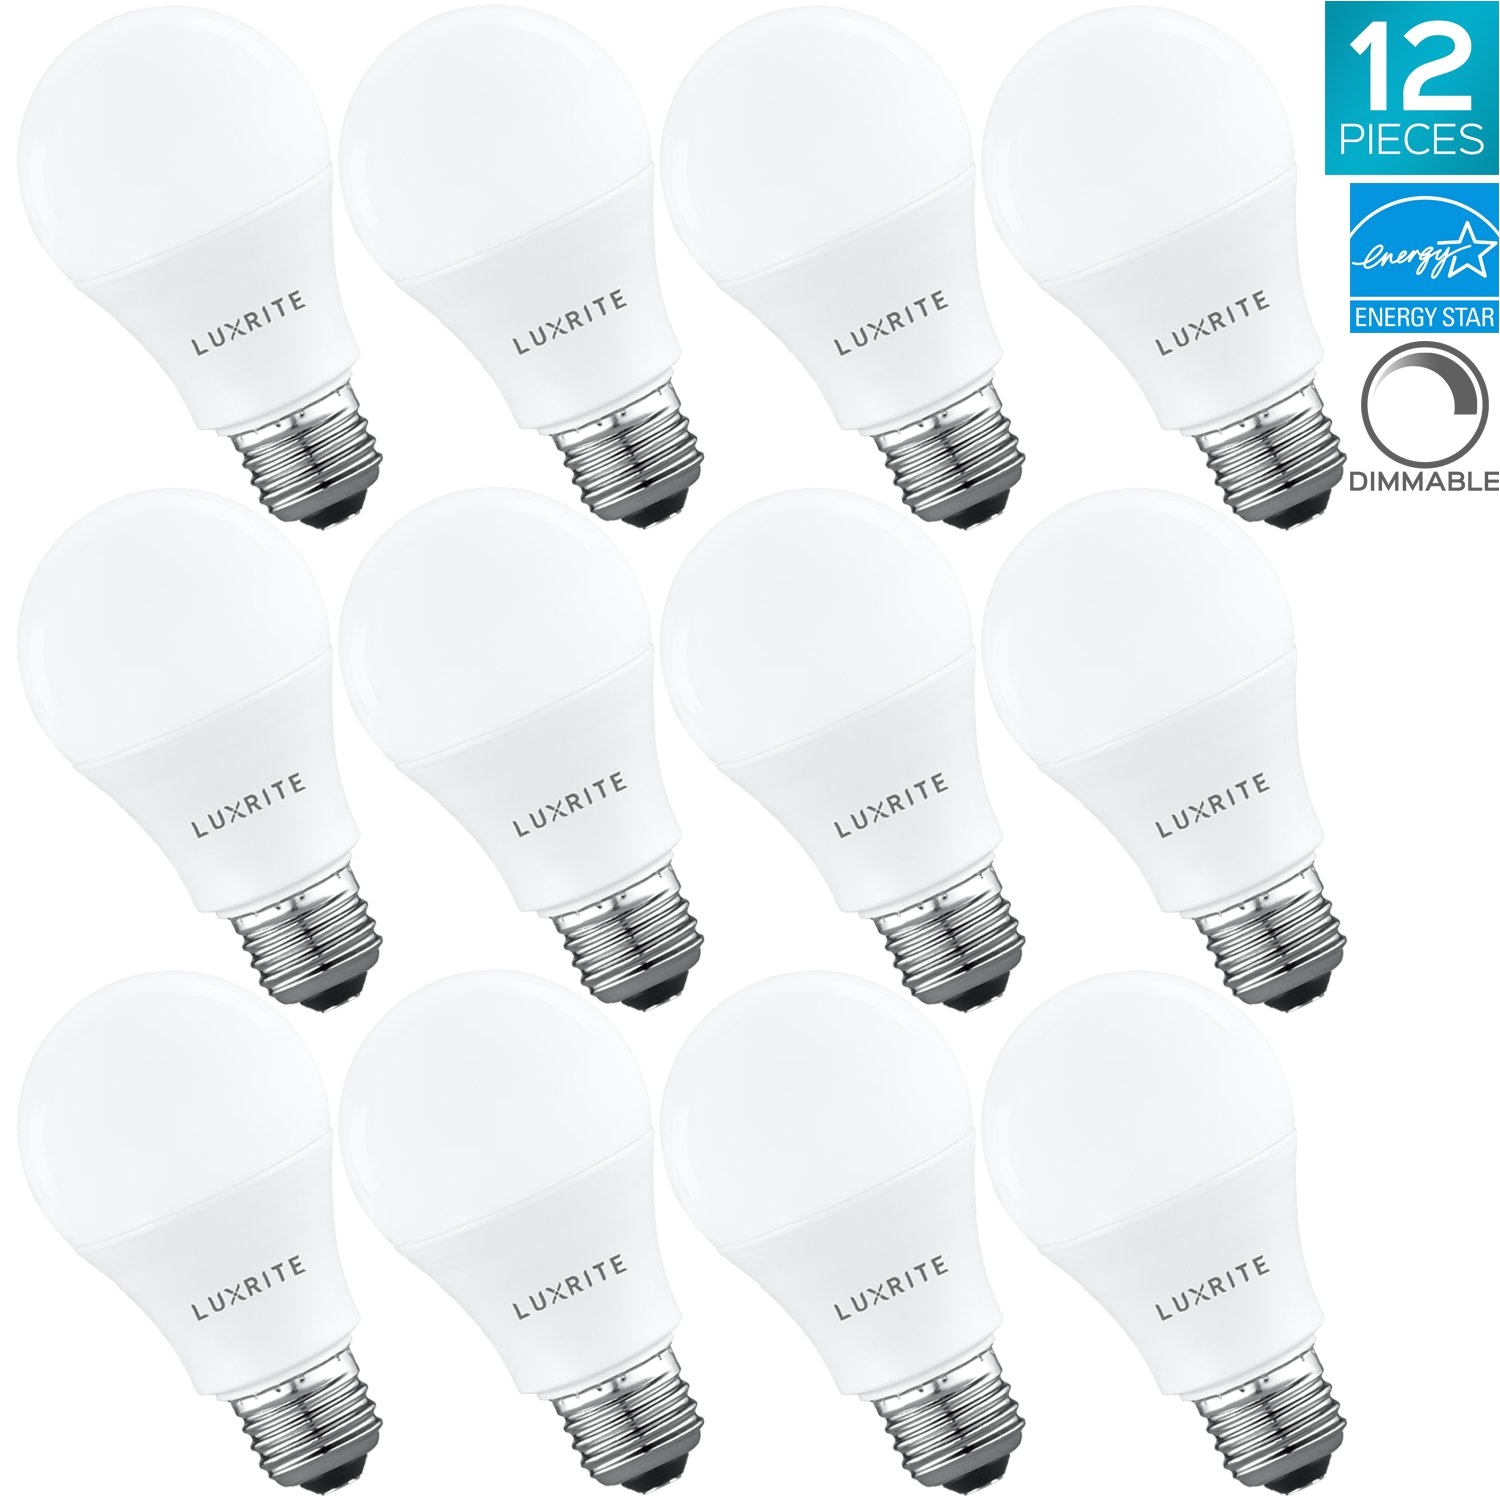 luxrite a19 led light bulb 60w equivalent 4000k cool white dimmable 800 lumens standard led bulb 9w e26 base energy star enclosed fixture rated